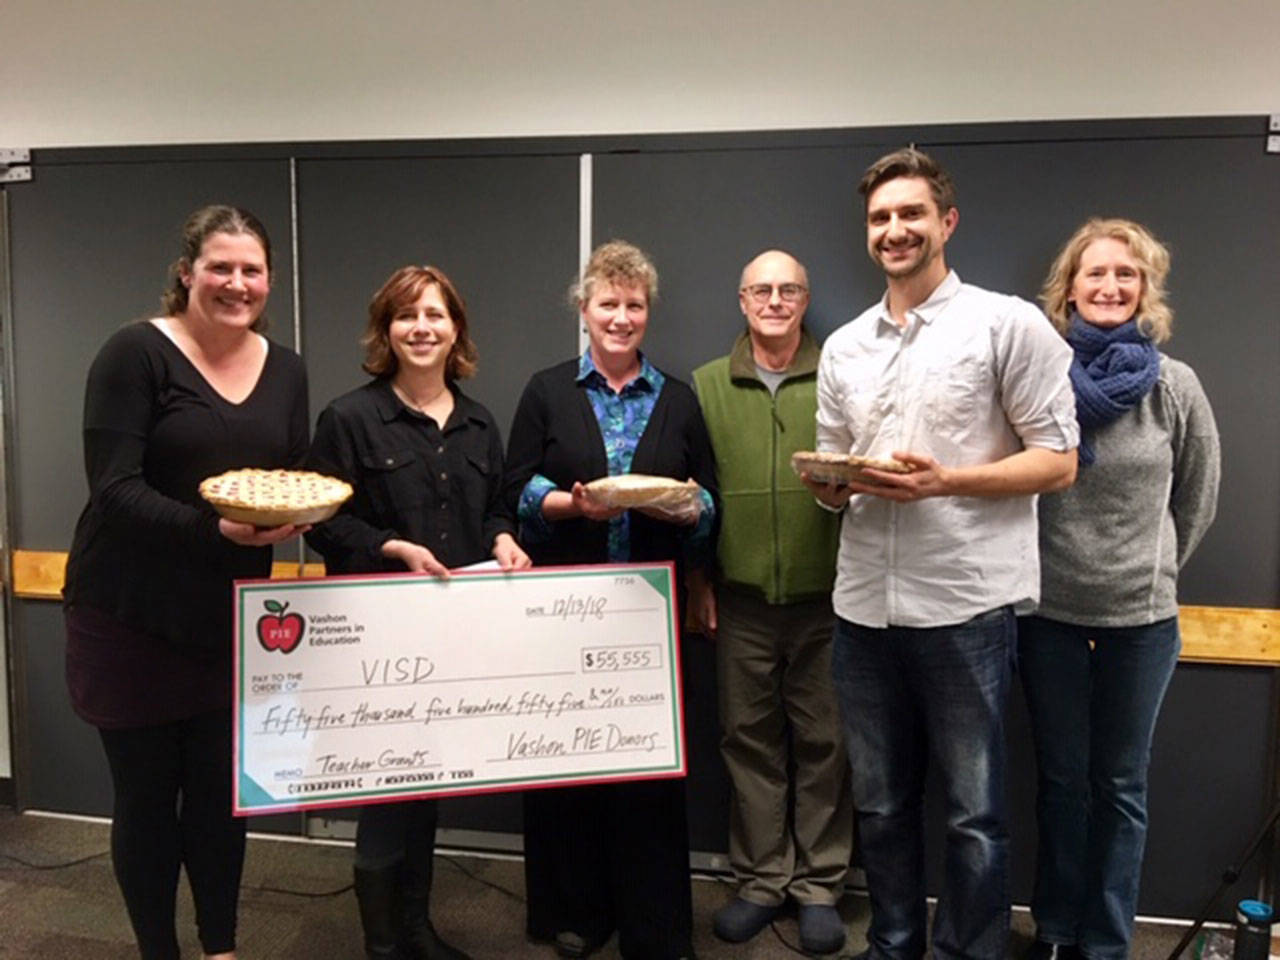 Teachers and PIE board members make a presentation to the school board at the Dec. 13 meeting. Left to right, they are Amy Holmes, Jenna Riggs, Esther Morrison, John “Oz” Osborne, Andy Callender and Carrie Van Buren. The lucky teachers who received grants also received a pie. (Courtesy Photo)